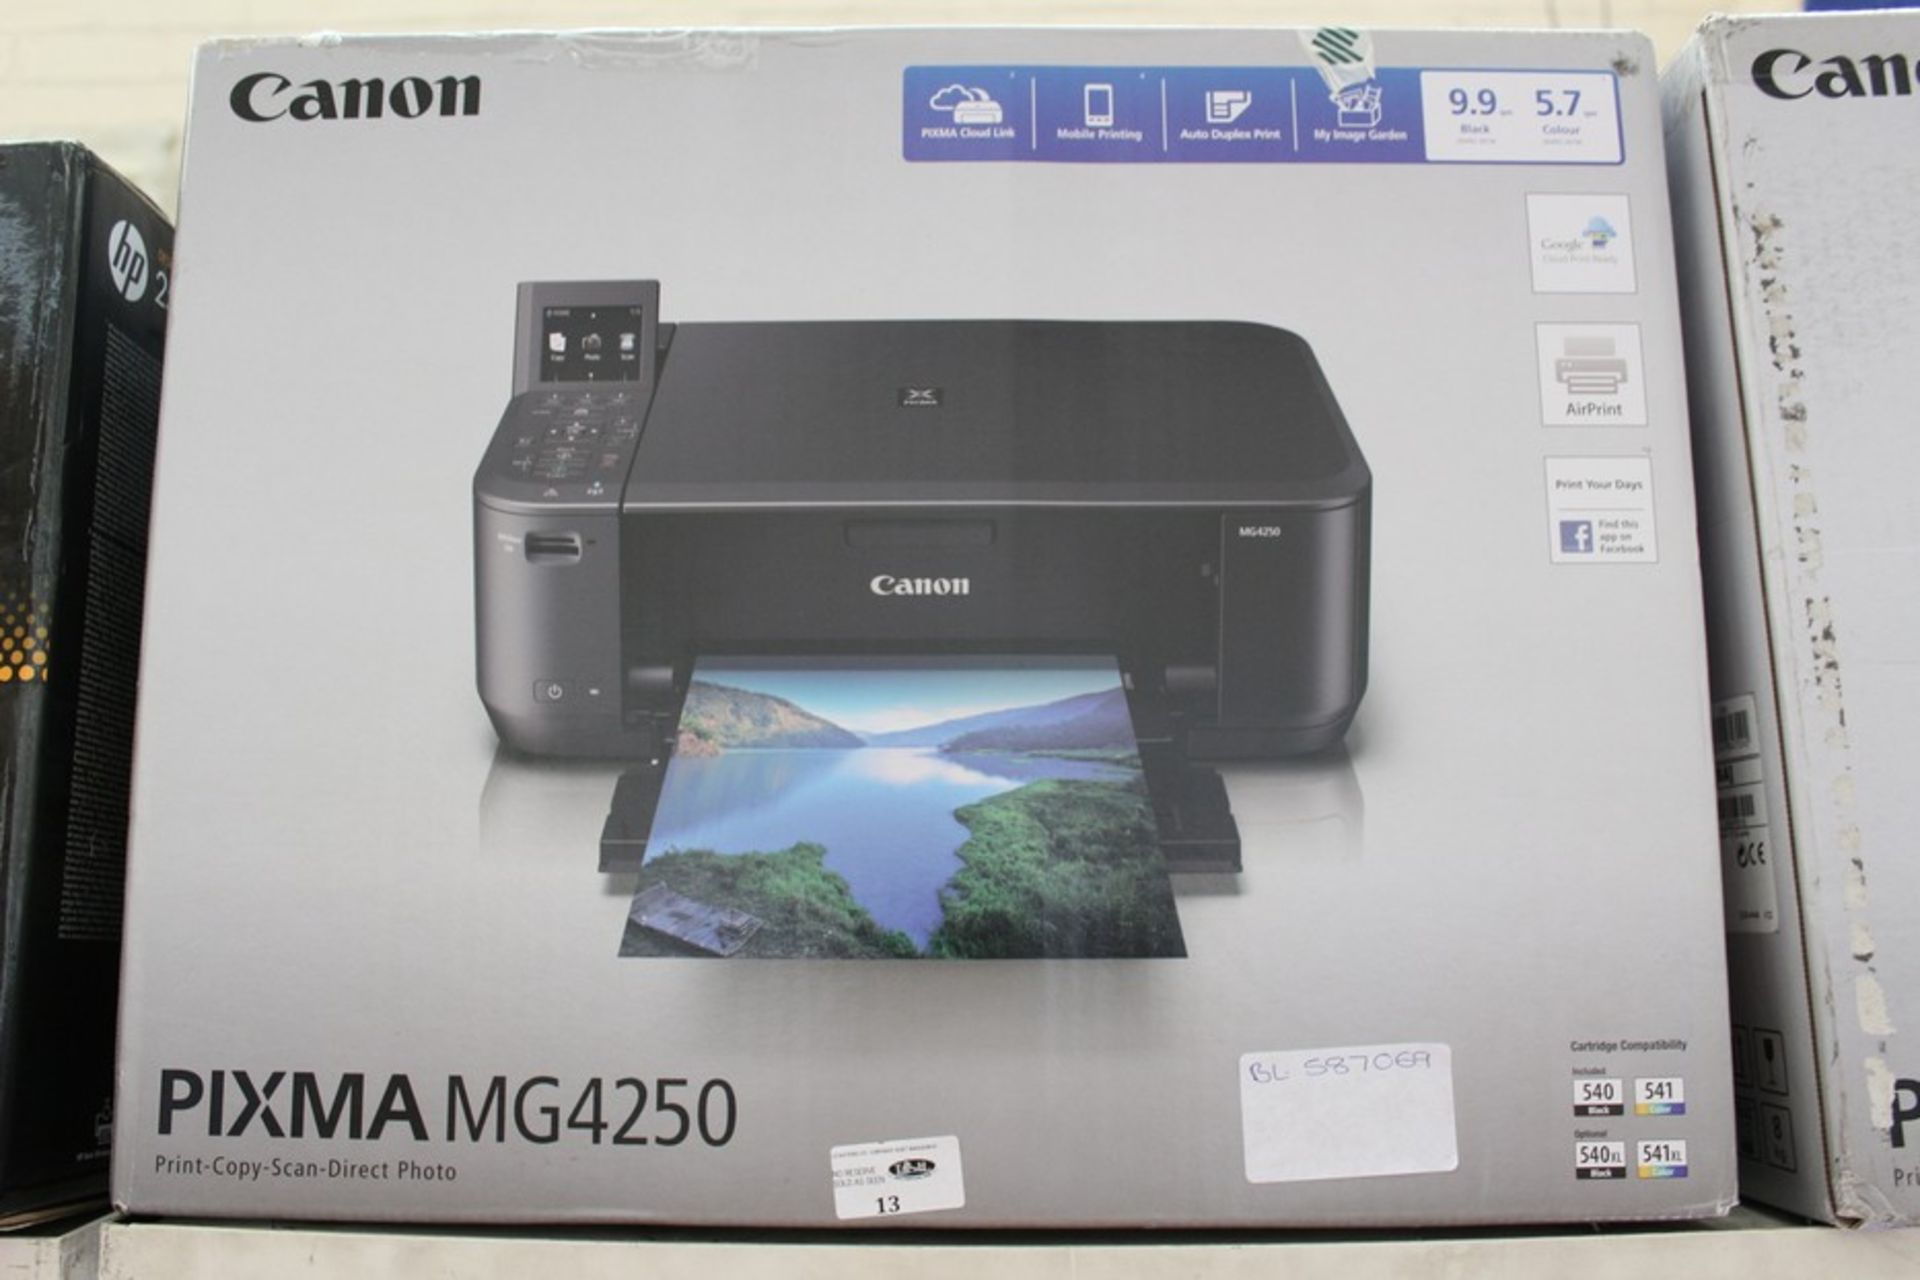 1 x BOXED CANON PIXMA MG4250 ALL IN ONE PRINTER SCANNER COPIER WITH WIFI (587069)  *PLEASE NOTE THAT